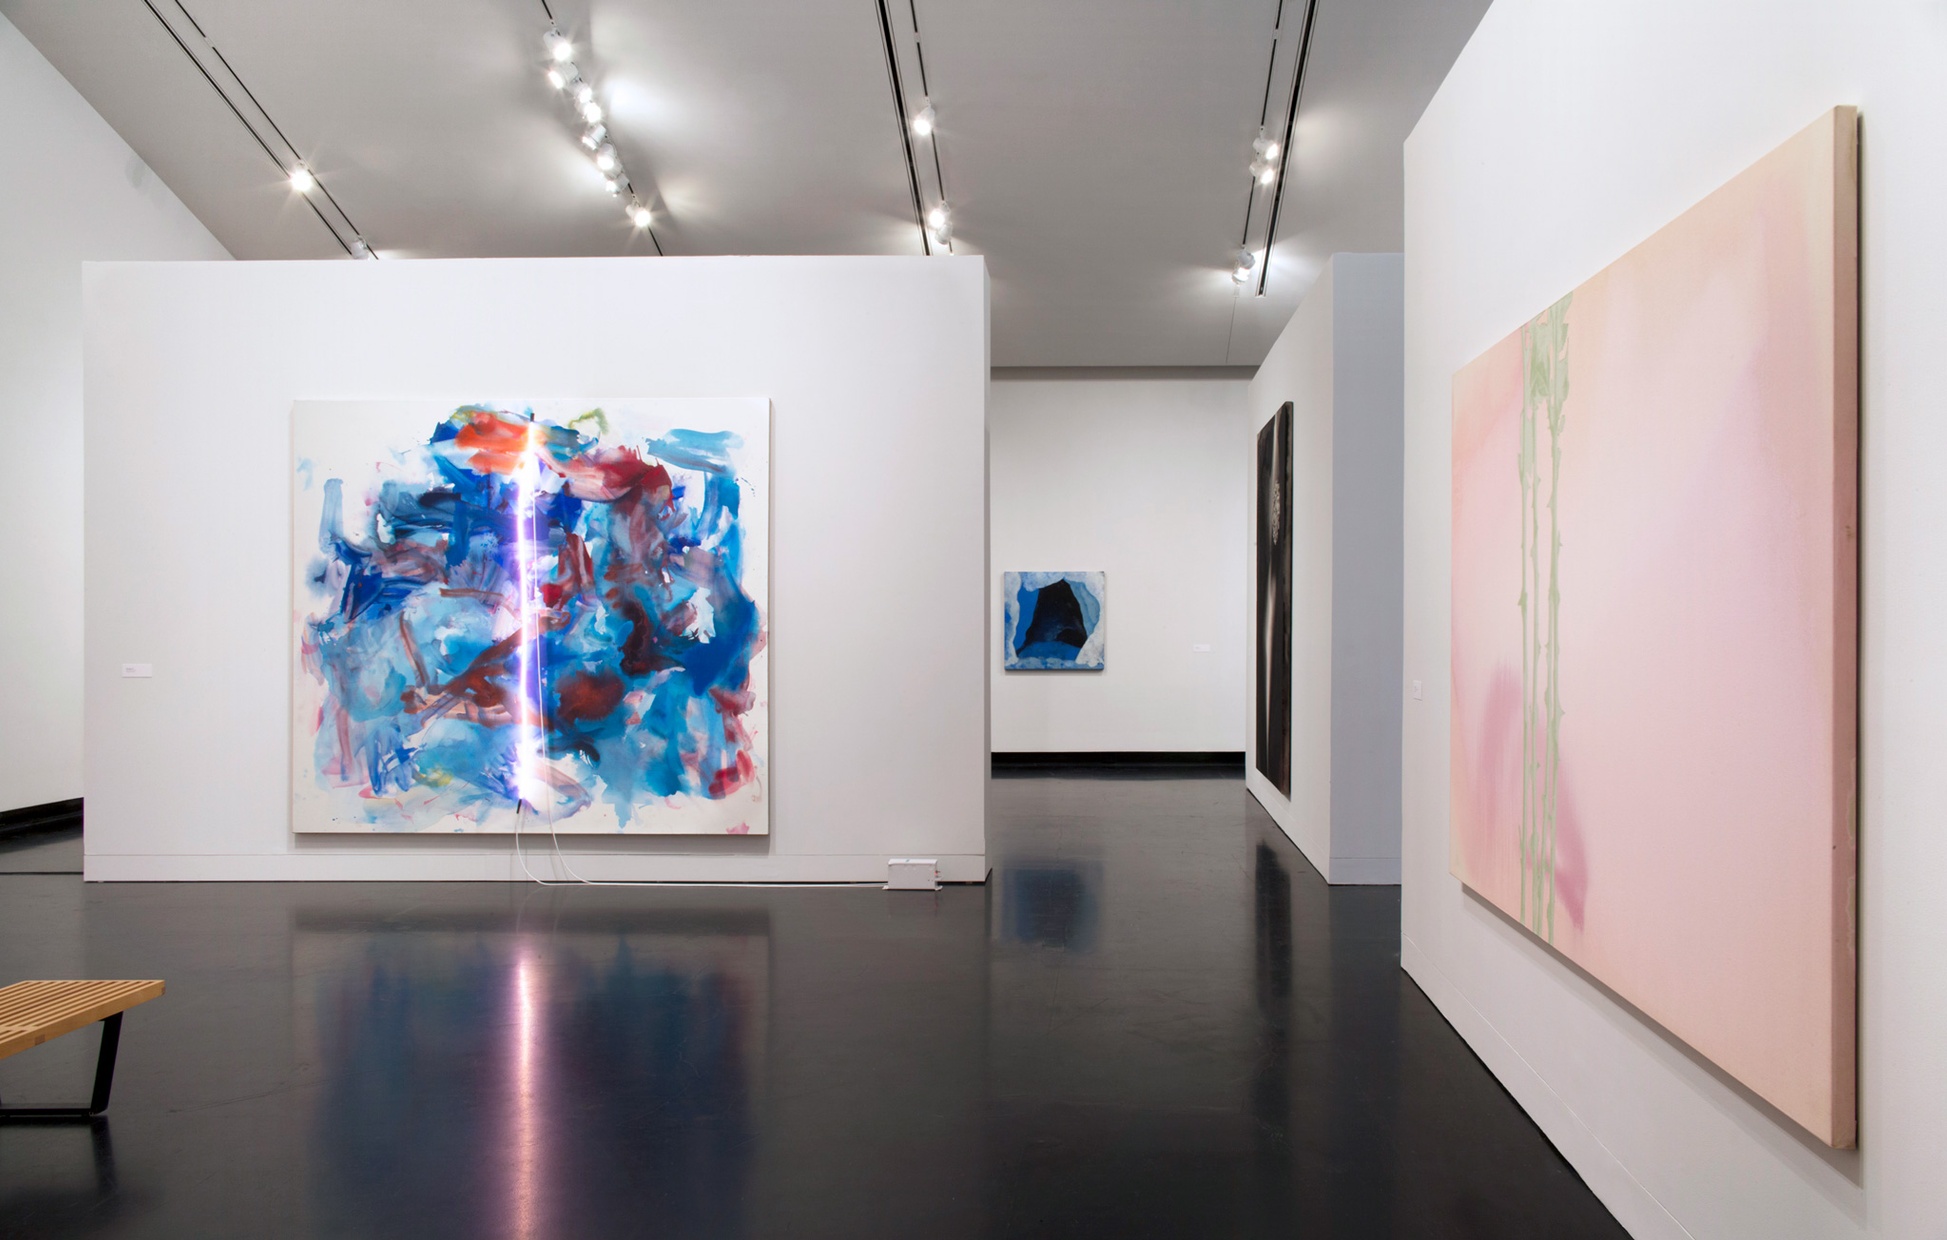 A large, abstract, blue and red painting with a neon tube across the center of the canvas on a white wall adjacent to a large, light pink painting with green stems and thorns.